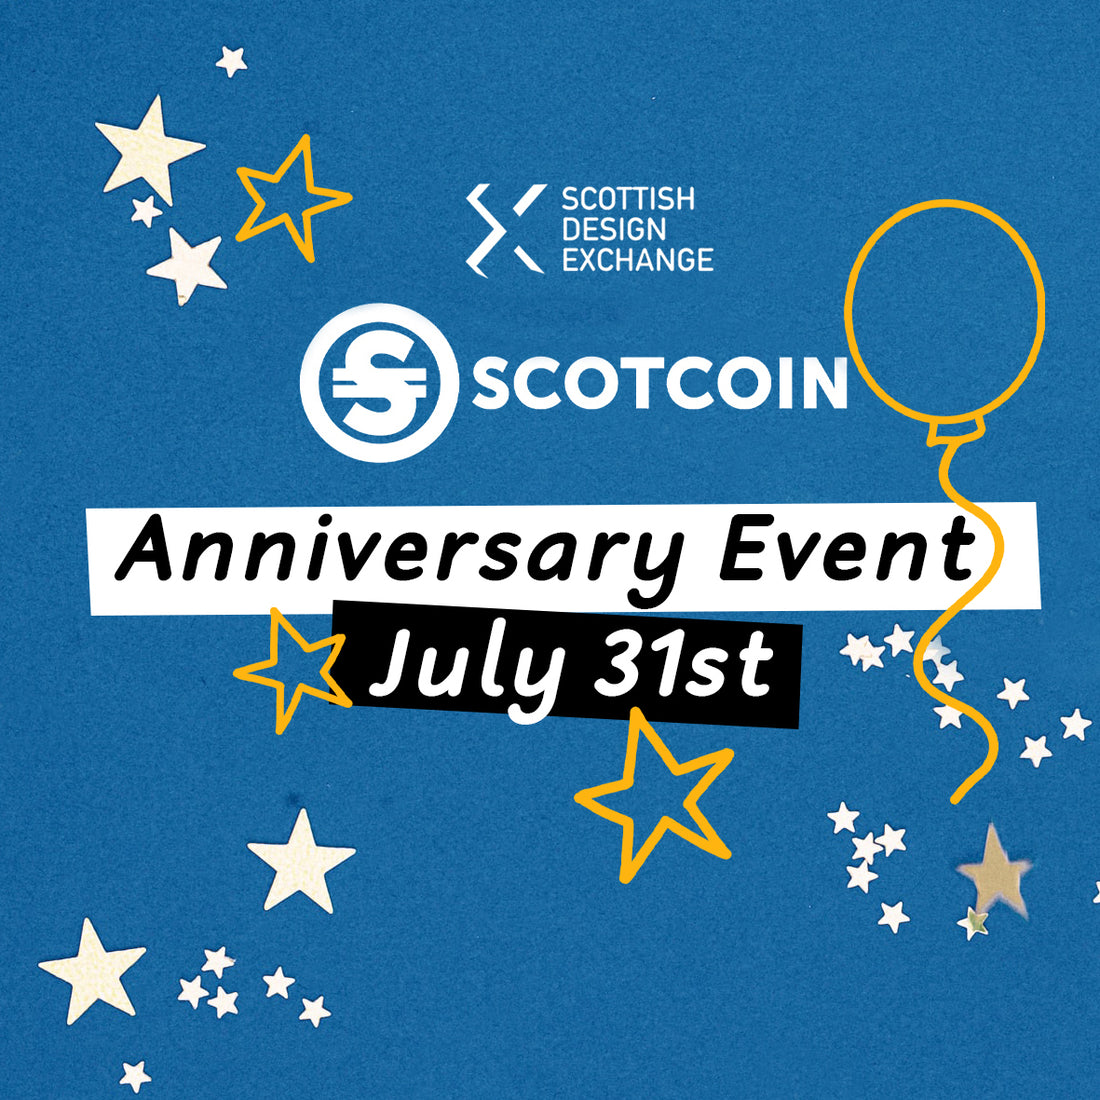 Celebrating SDX's 6th Anniversary with Scotcoin, a Crypto Currency with community at its heart